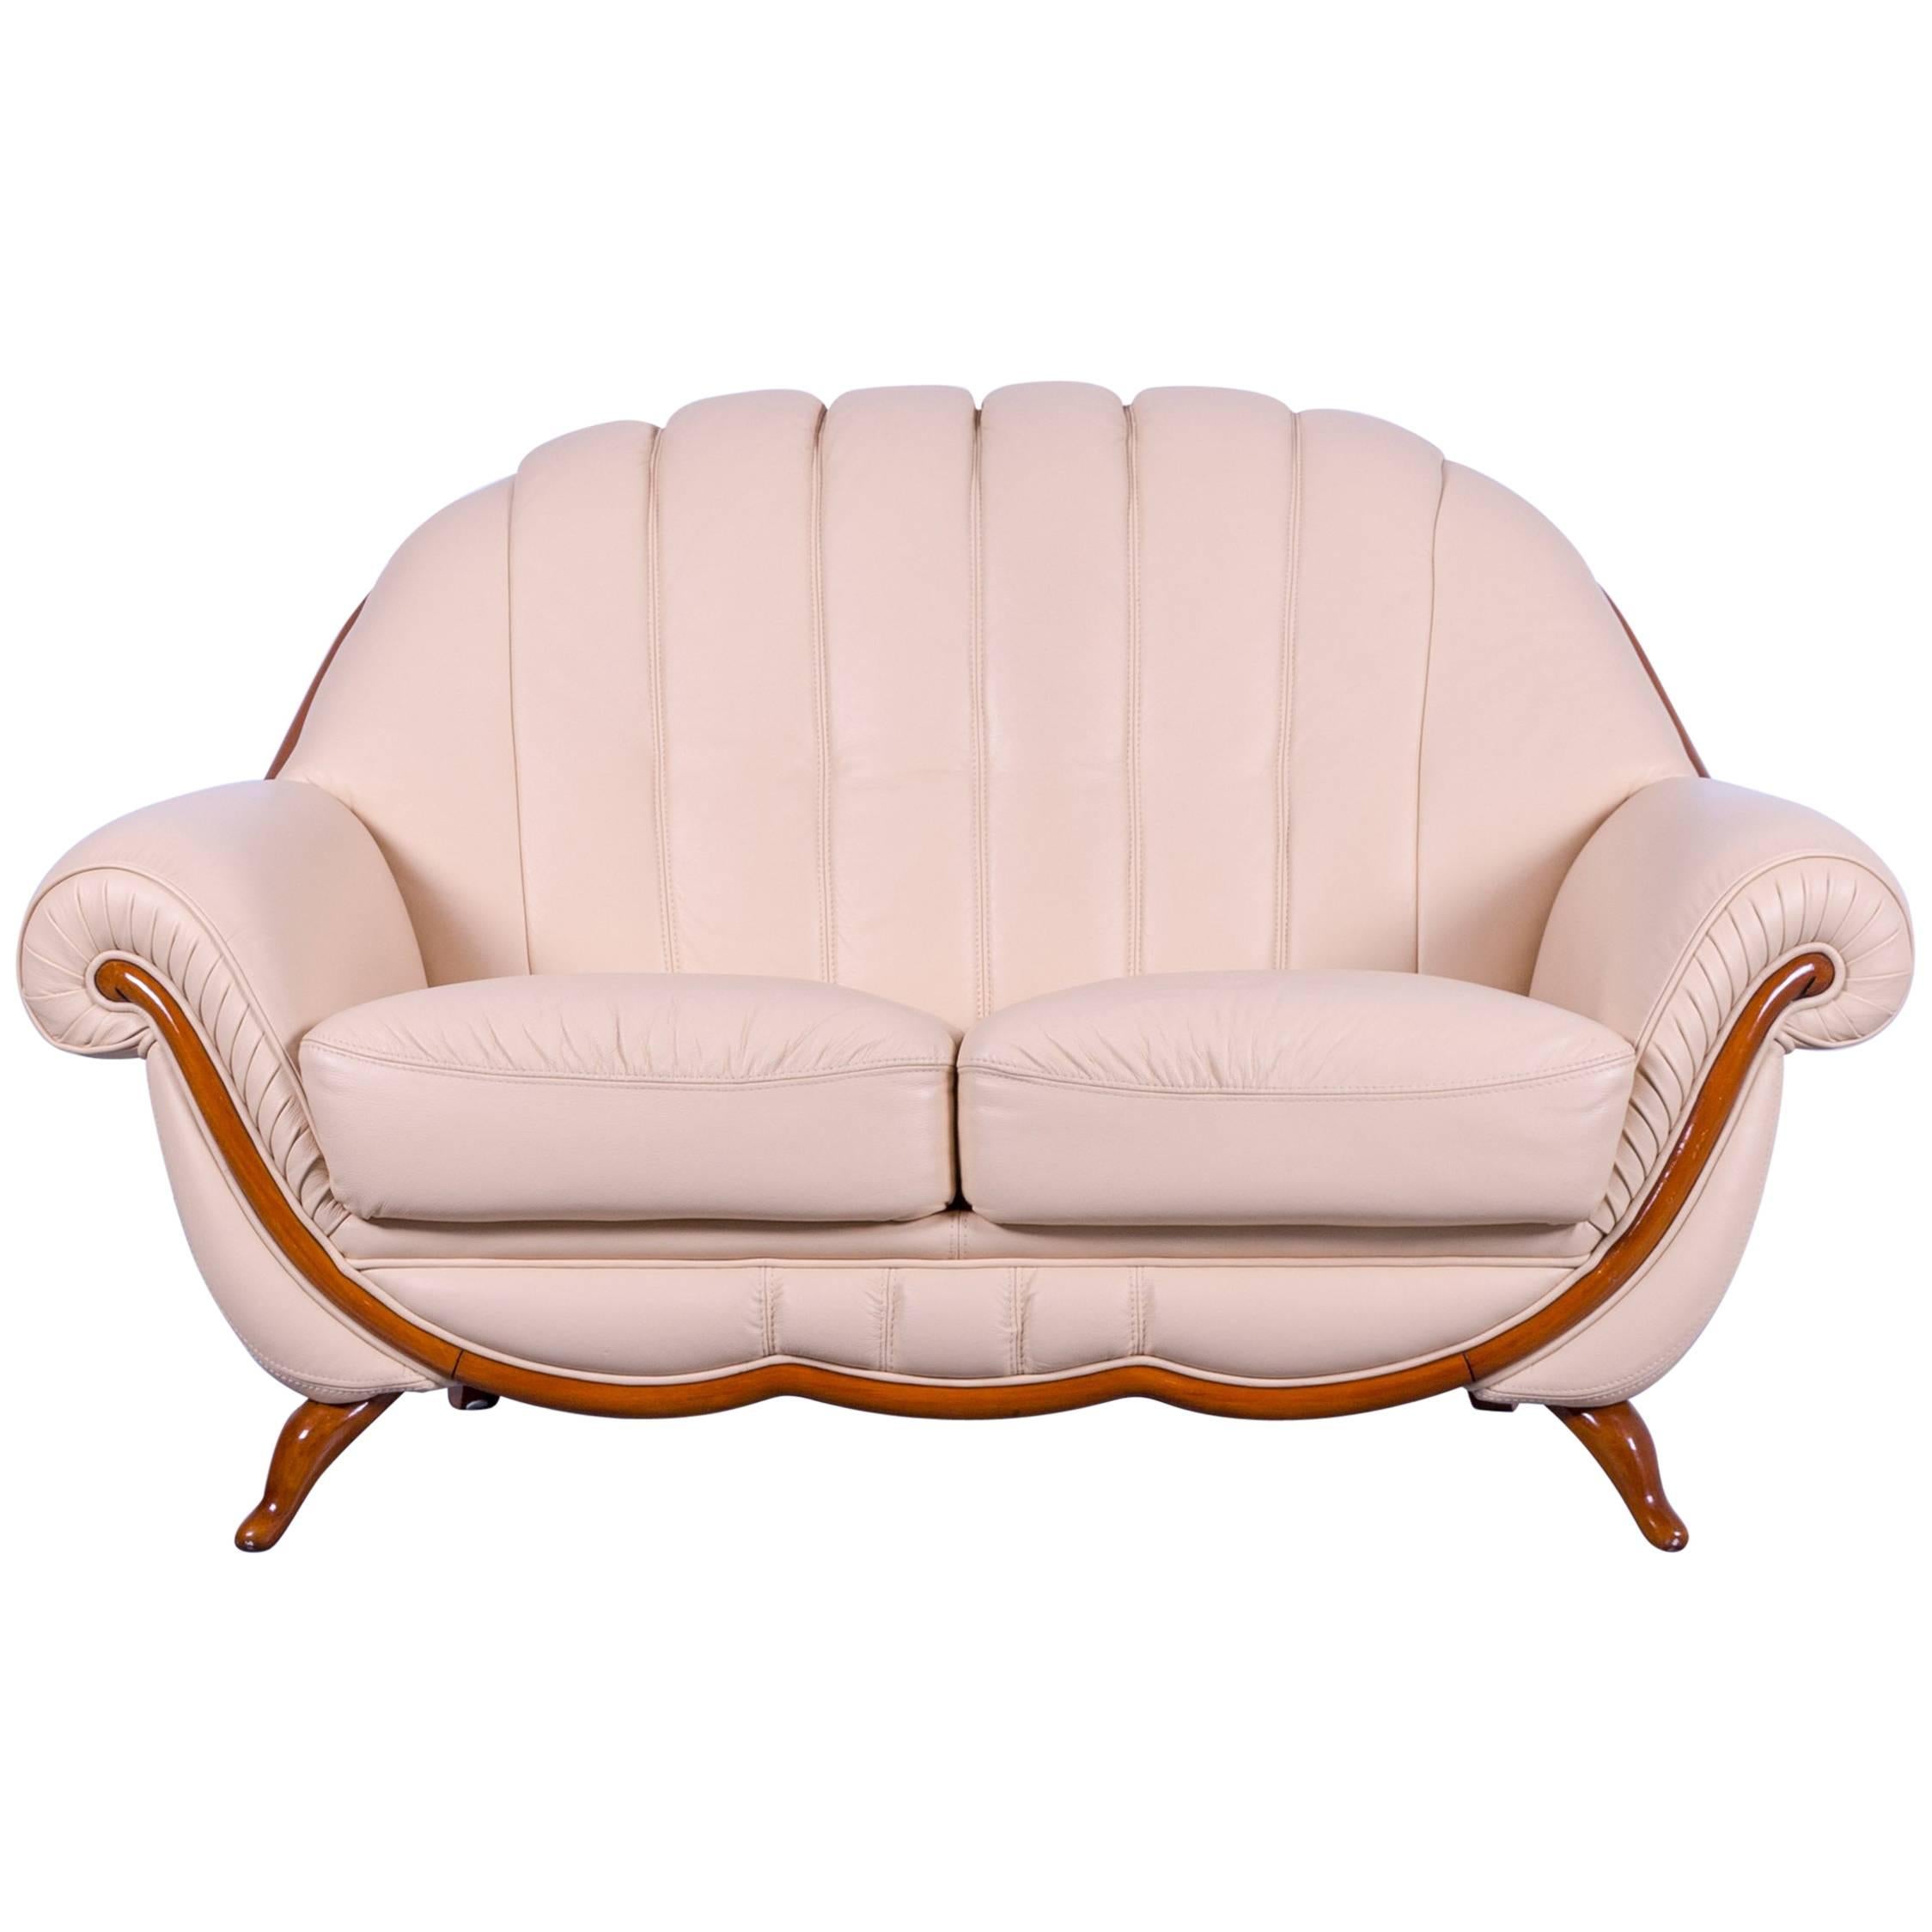 Nieri Designer Sofa Creme Beige Leather Two-Seat Couch Wood